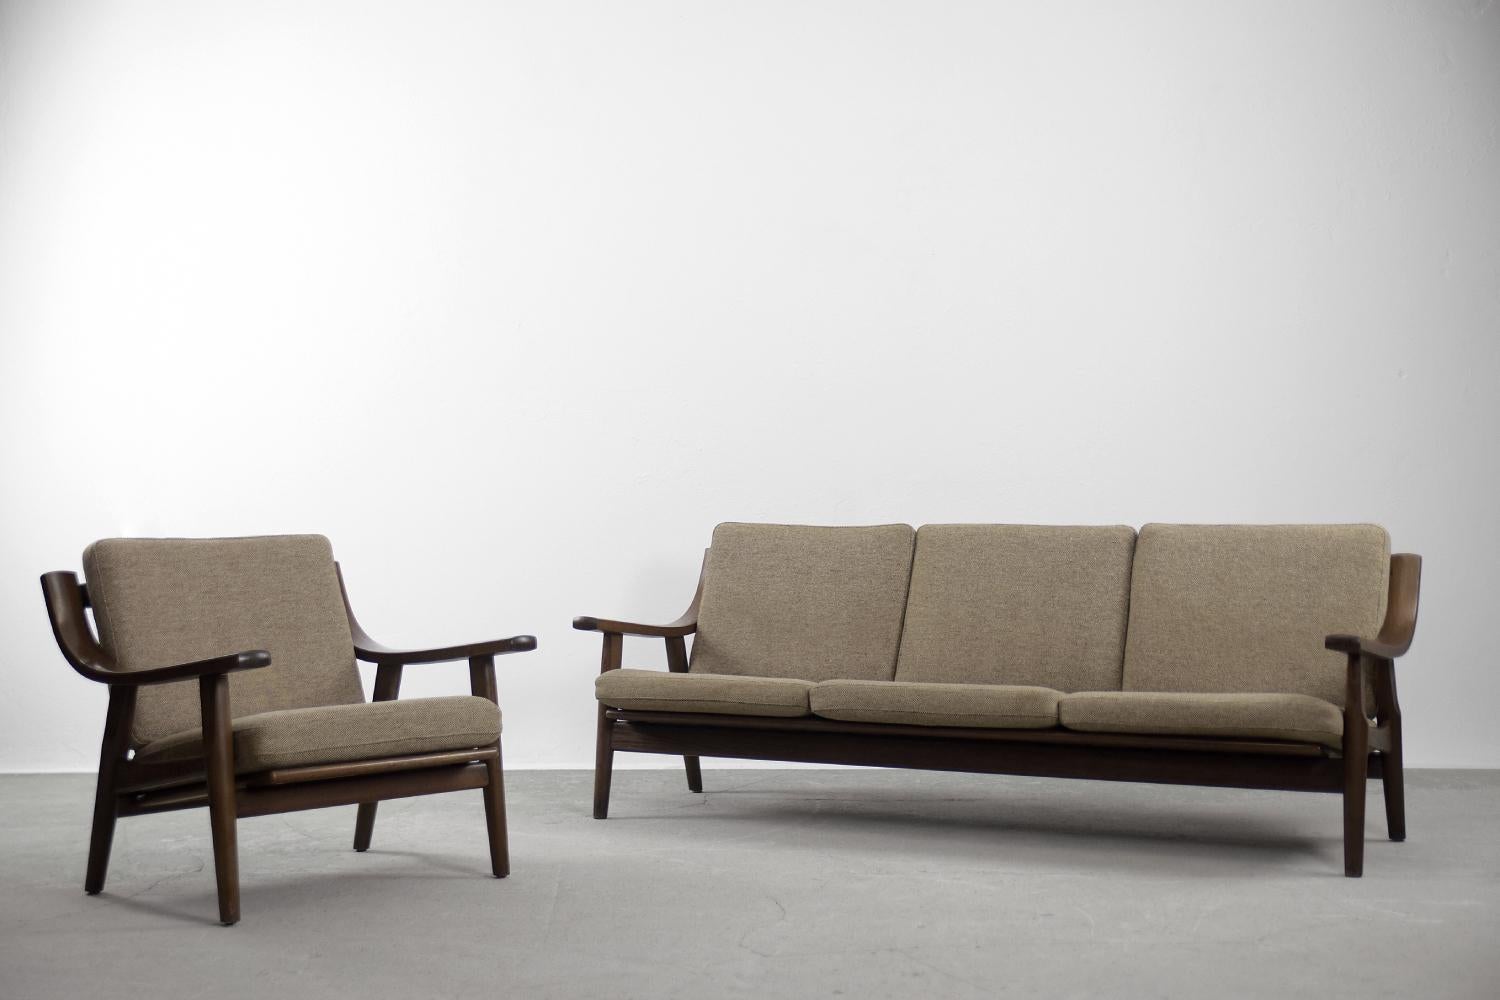 This elegant lounge set consist of a three-seater sofa and an armchair. The set was designed by Hans J. Wegner for the Getama Gedsted in Denmark during the 1960s. This is the GE-530 model. The frame is made of solid oak wood in dark brown. The frame